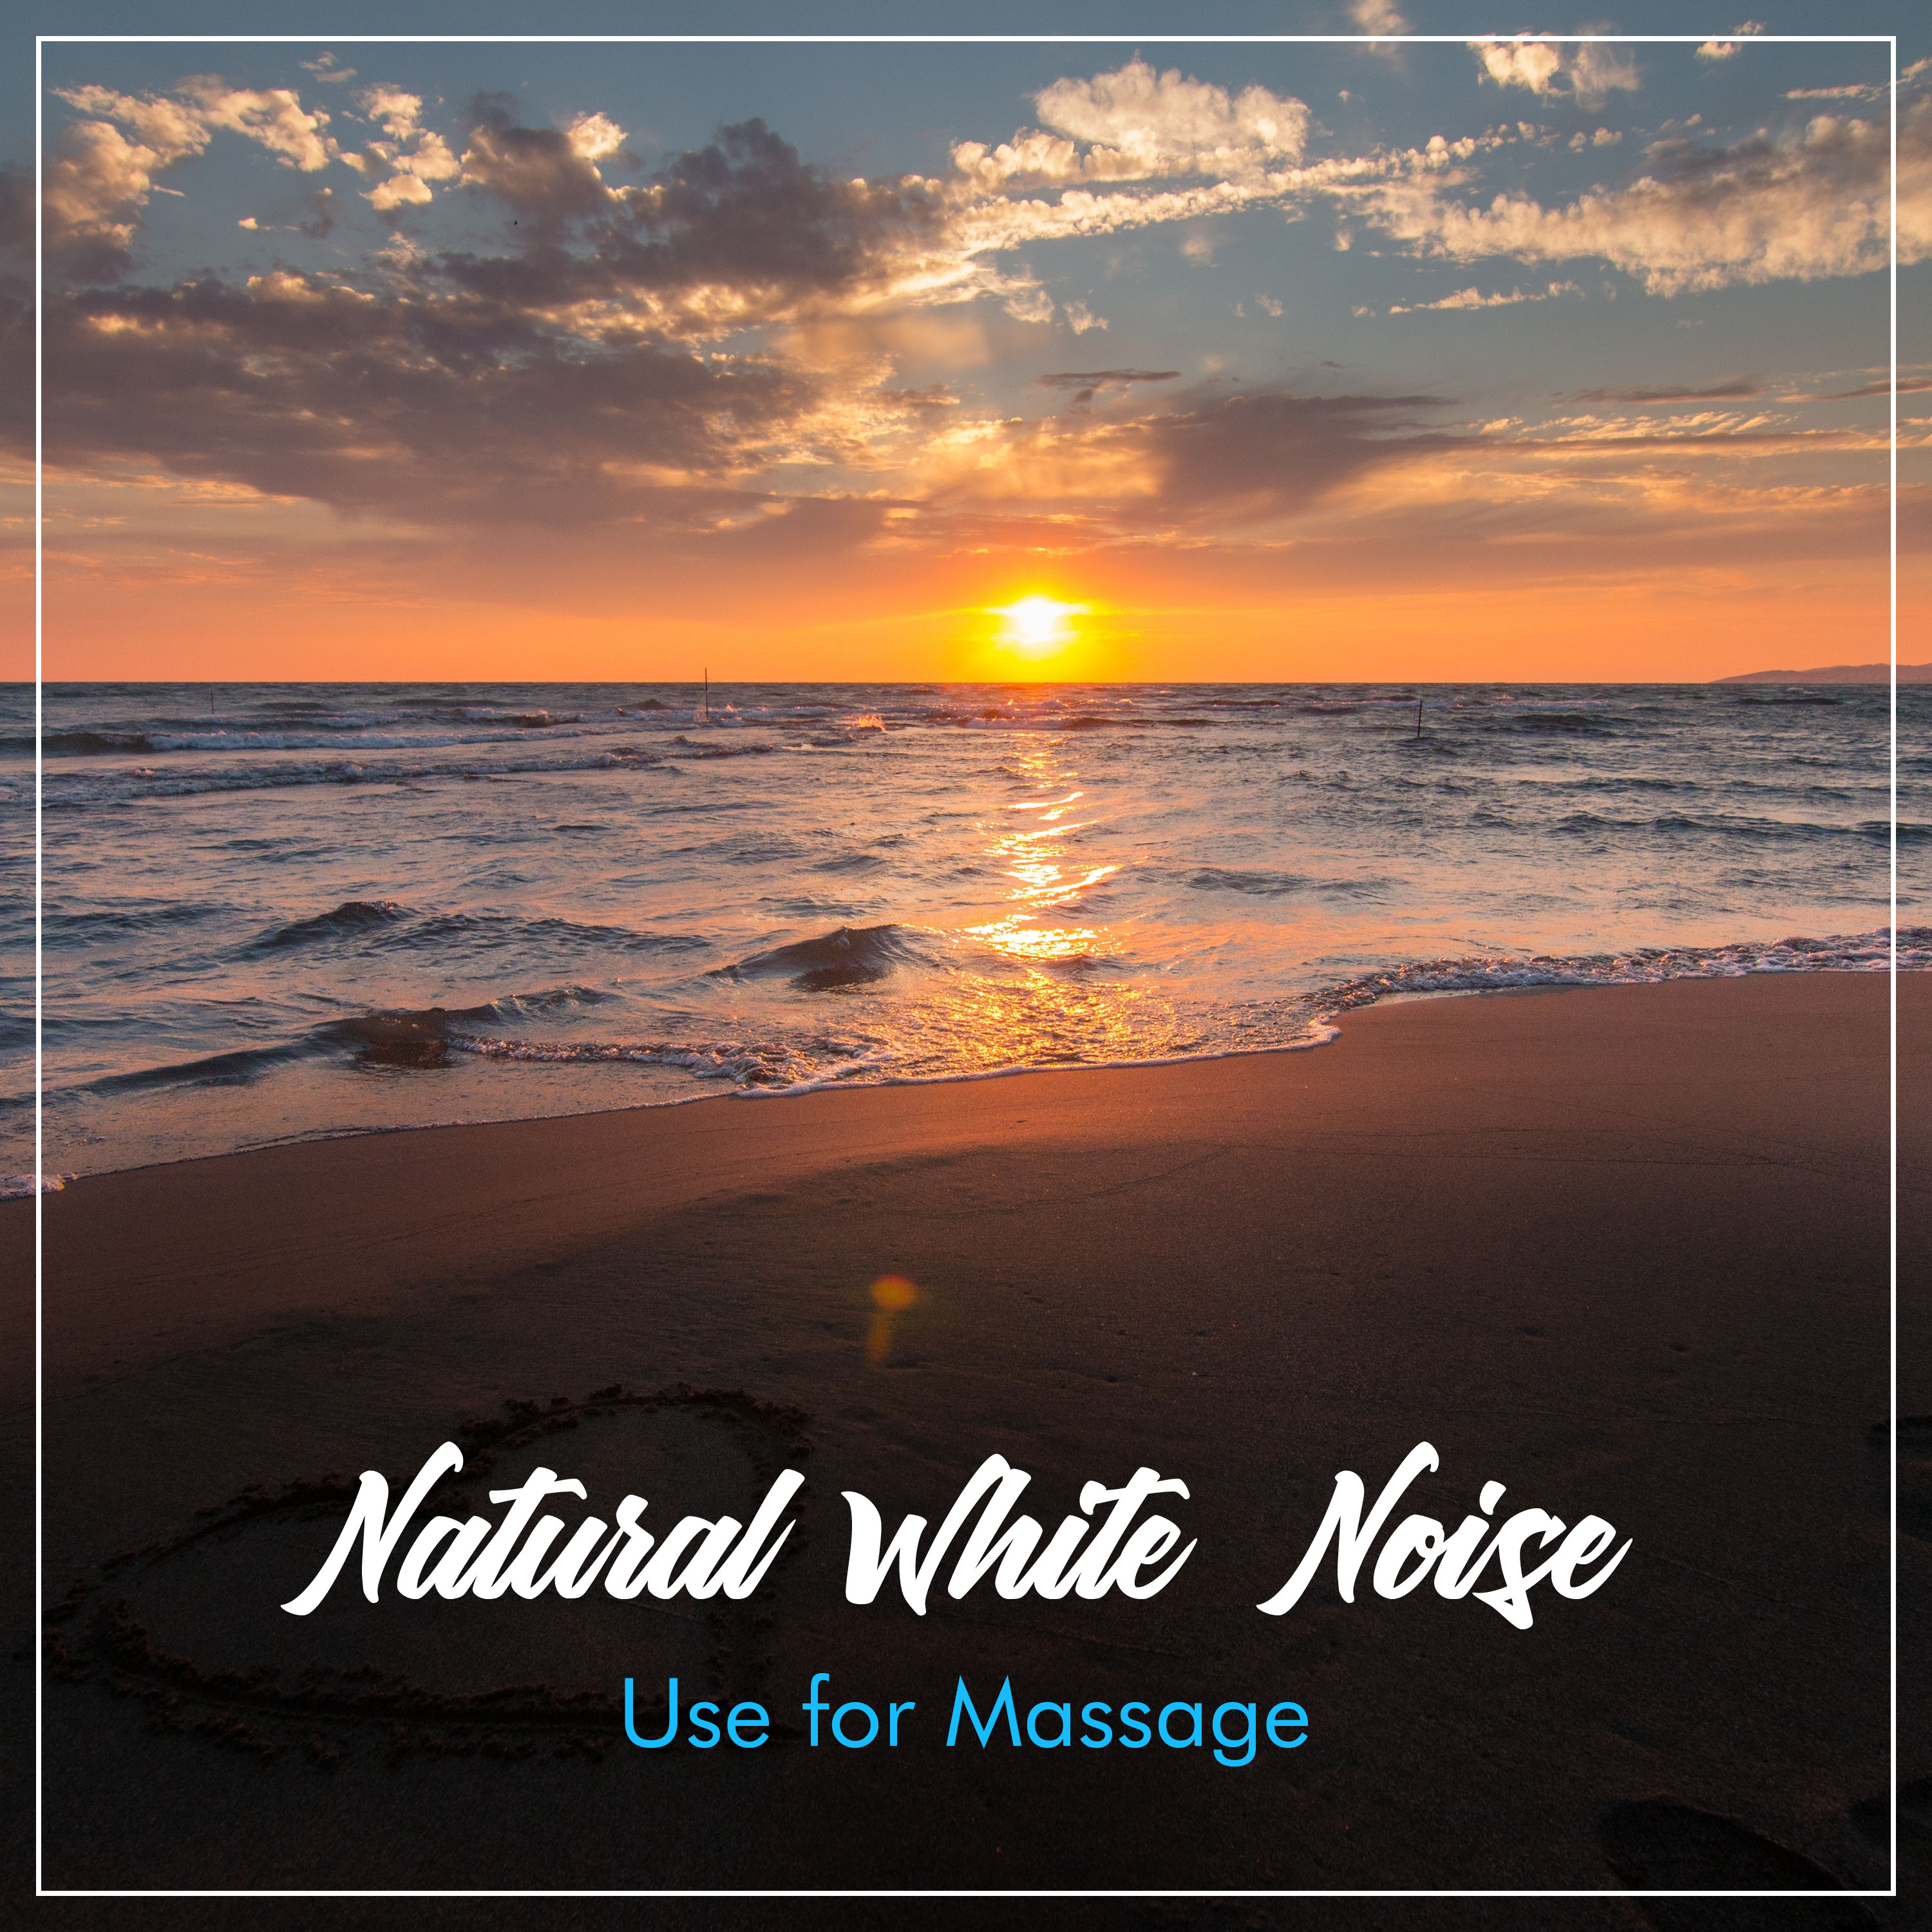 10 Natural White Noise and Meditation Sounds: Use for Massage and Pilate